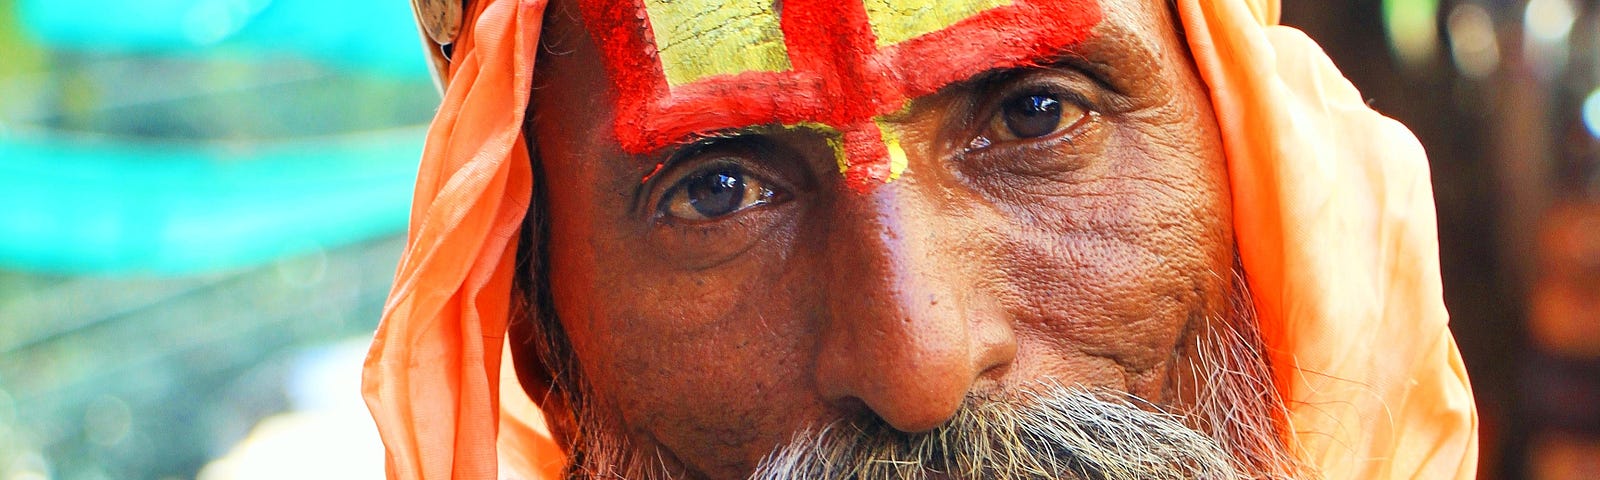 An indigenous wise man staring into the lens